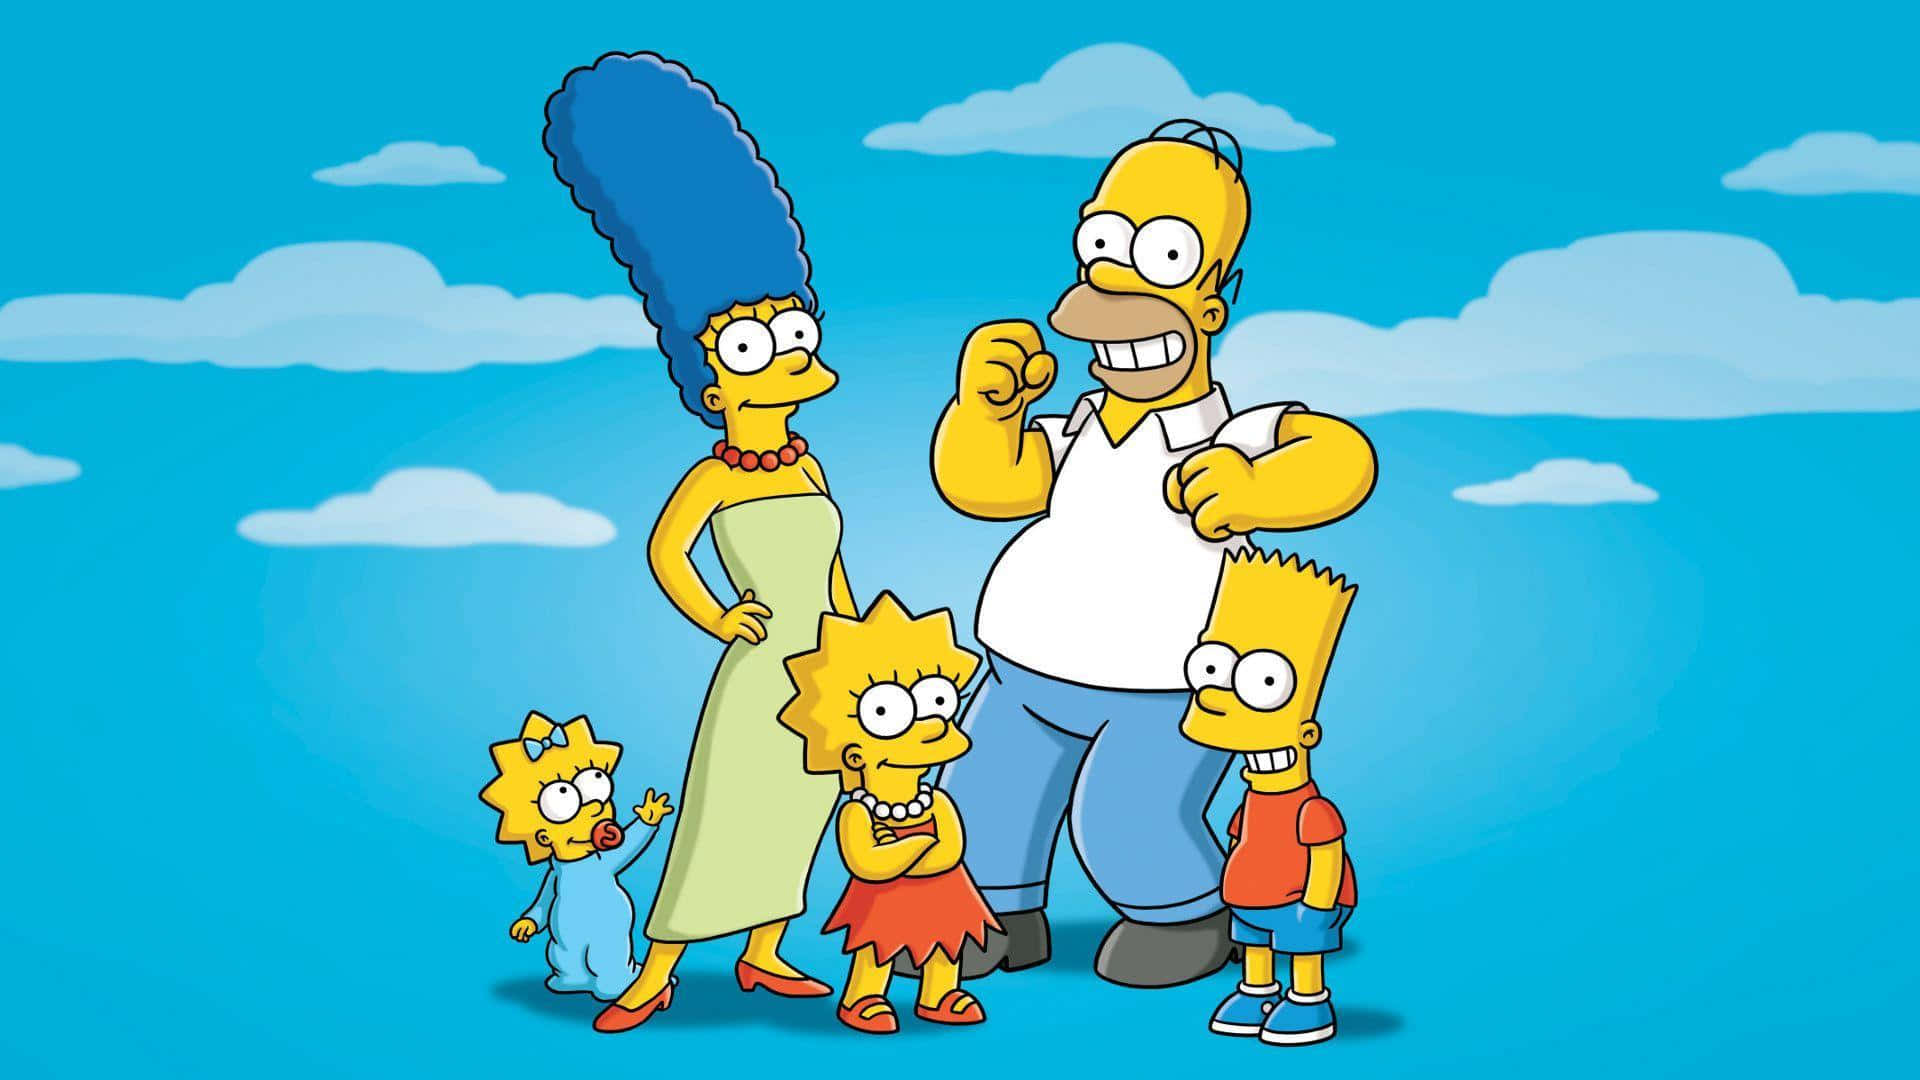 The Simpsons Family Posing Together in Springfield